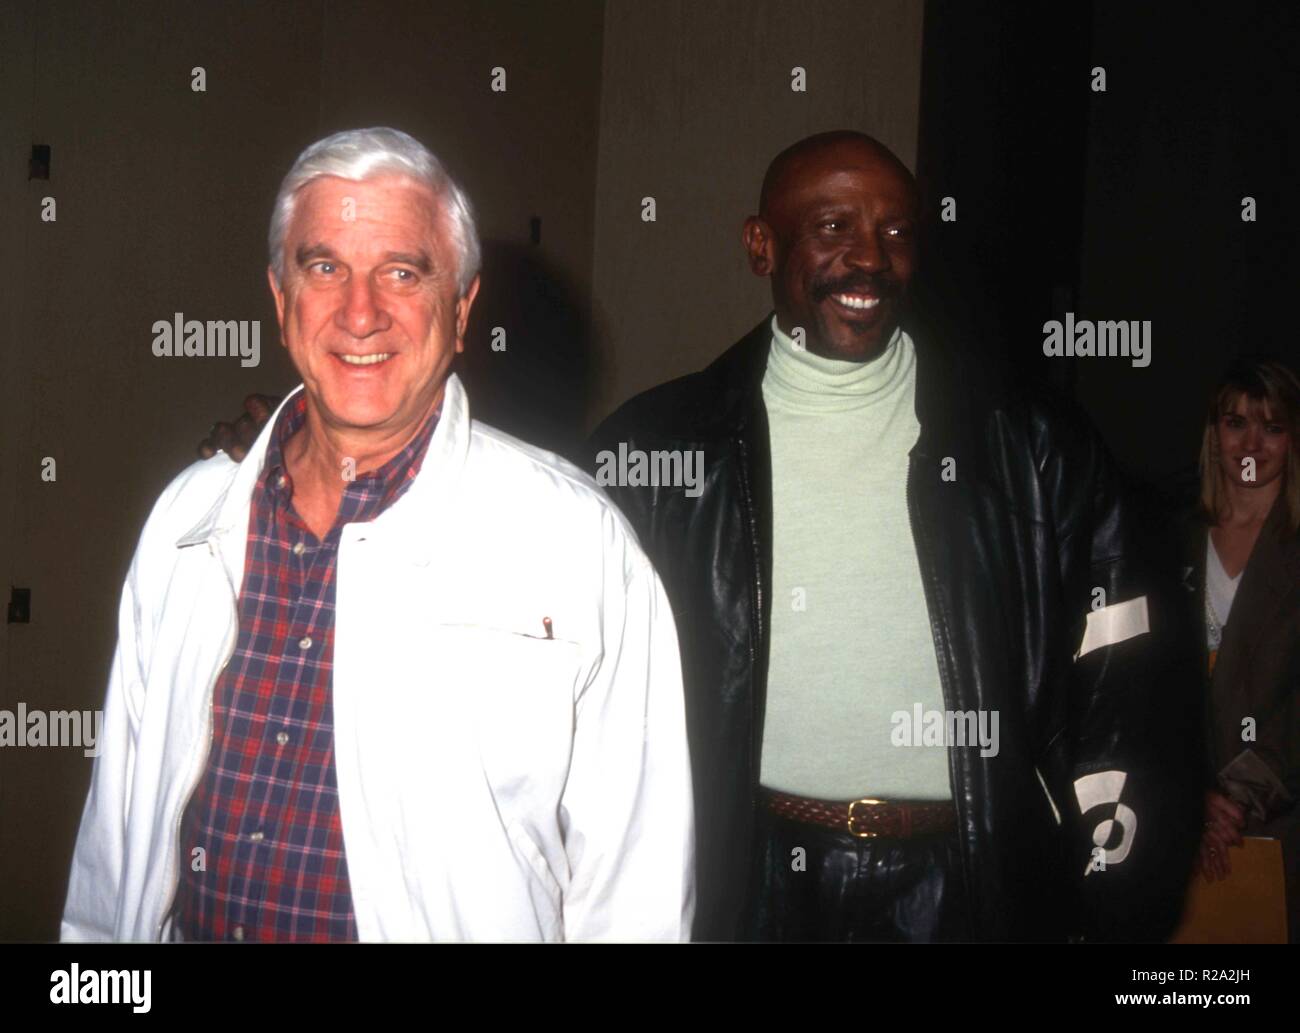 BEVERLY HILLS, CA - JANUARY 23: Actor Leslie Nielsen  and actor Lou Gossett Jr. attend the 50th Annual Golden Globe Awards on January 23, 1993 at the Beverly Hilton Hotel in Beverly Hills, California. Photo by Barry King/Alamy Stock Photo Stock Photo